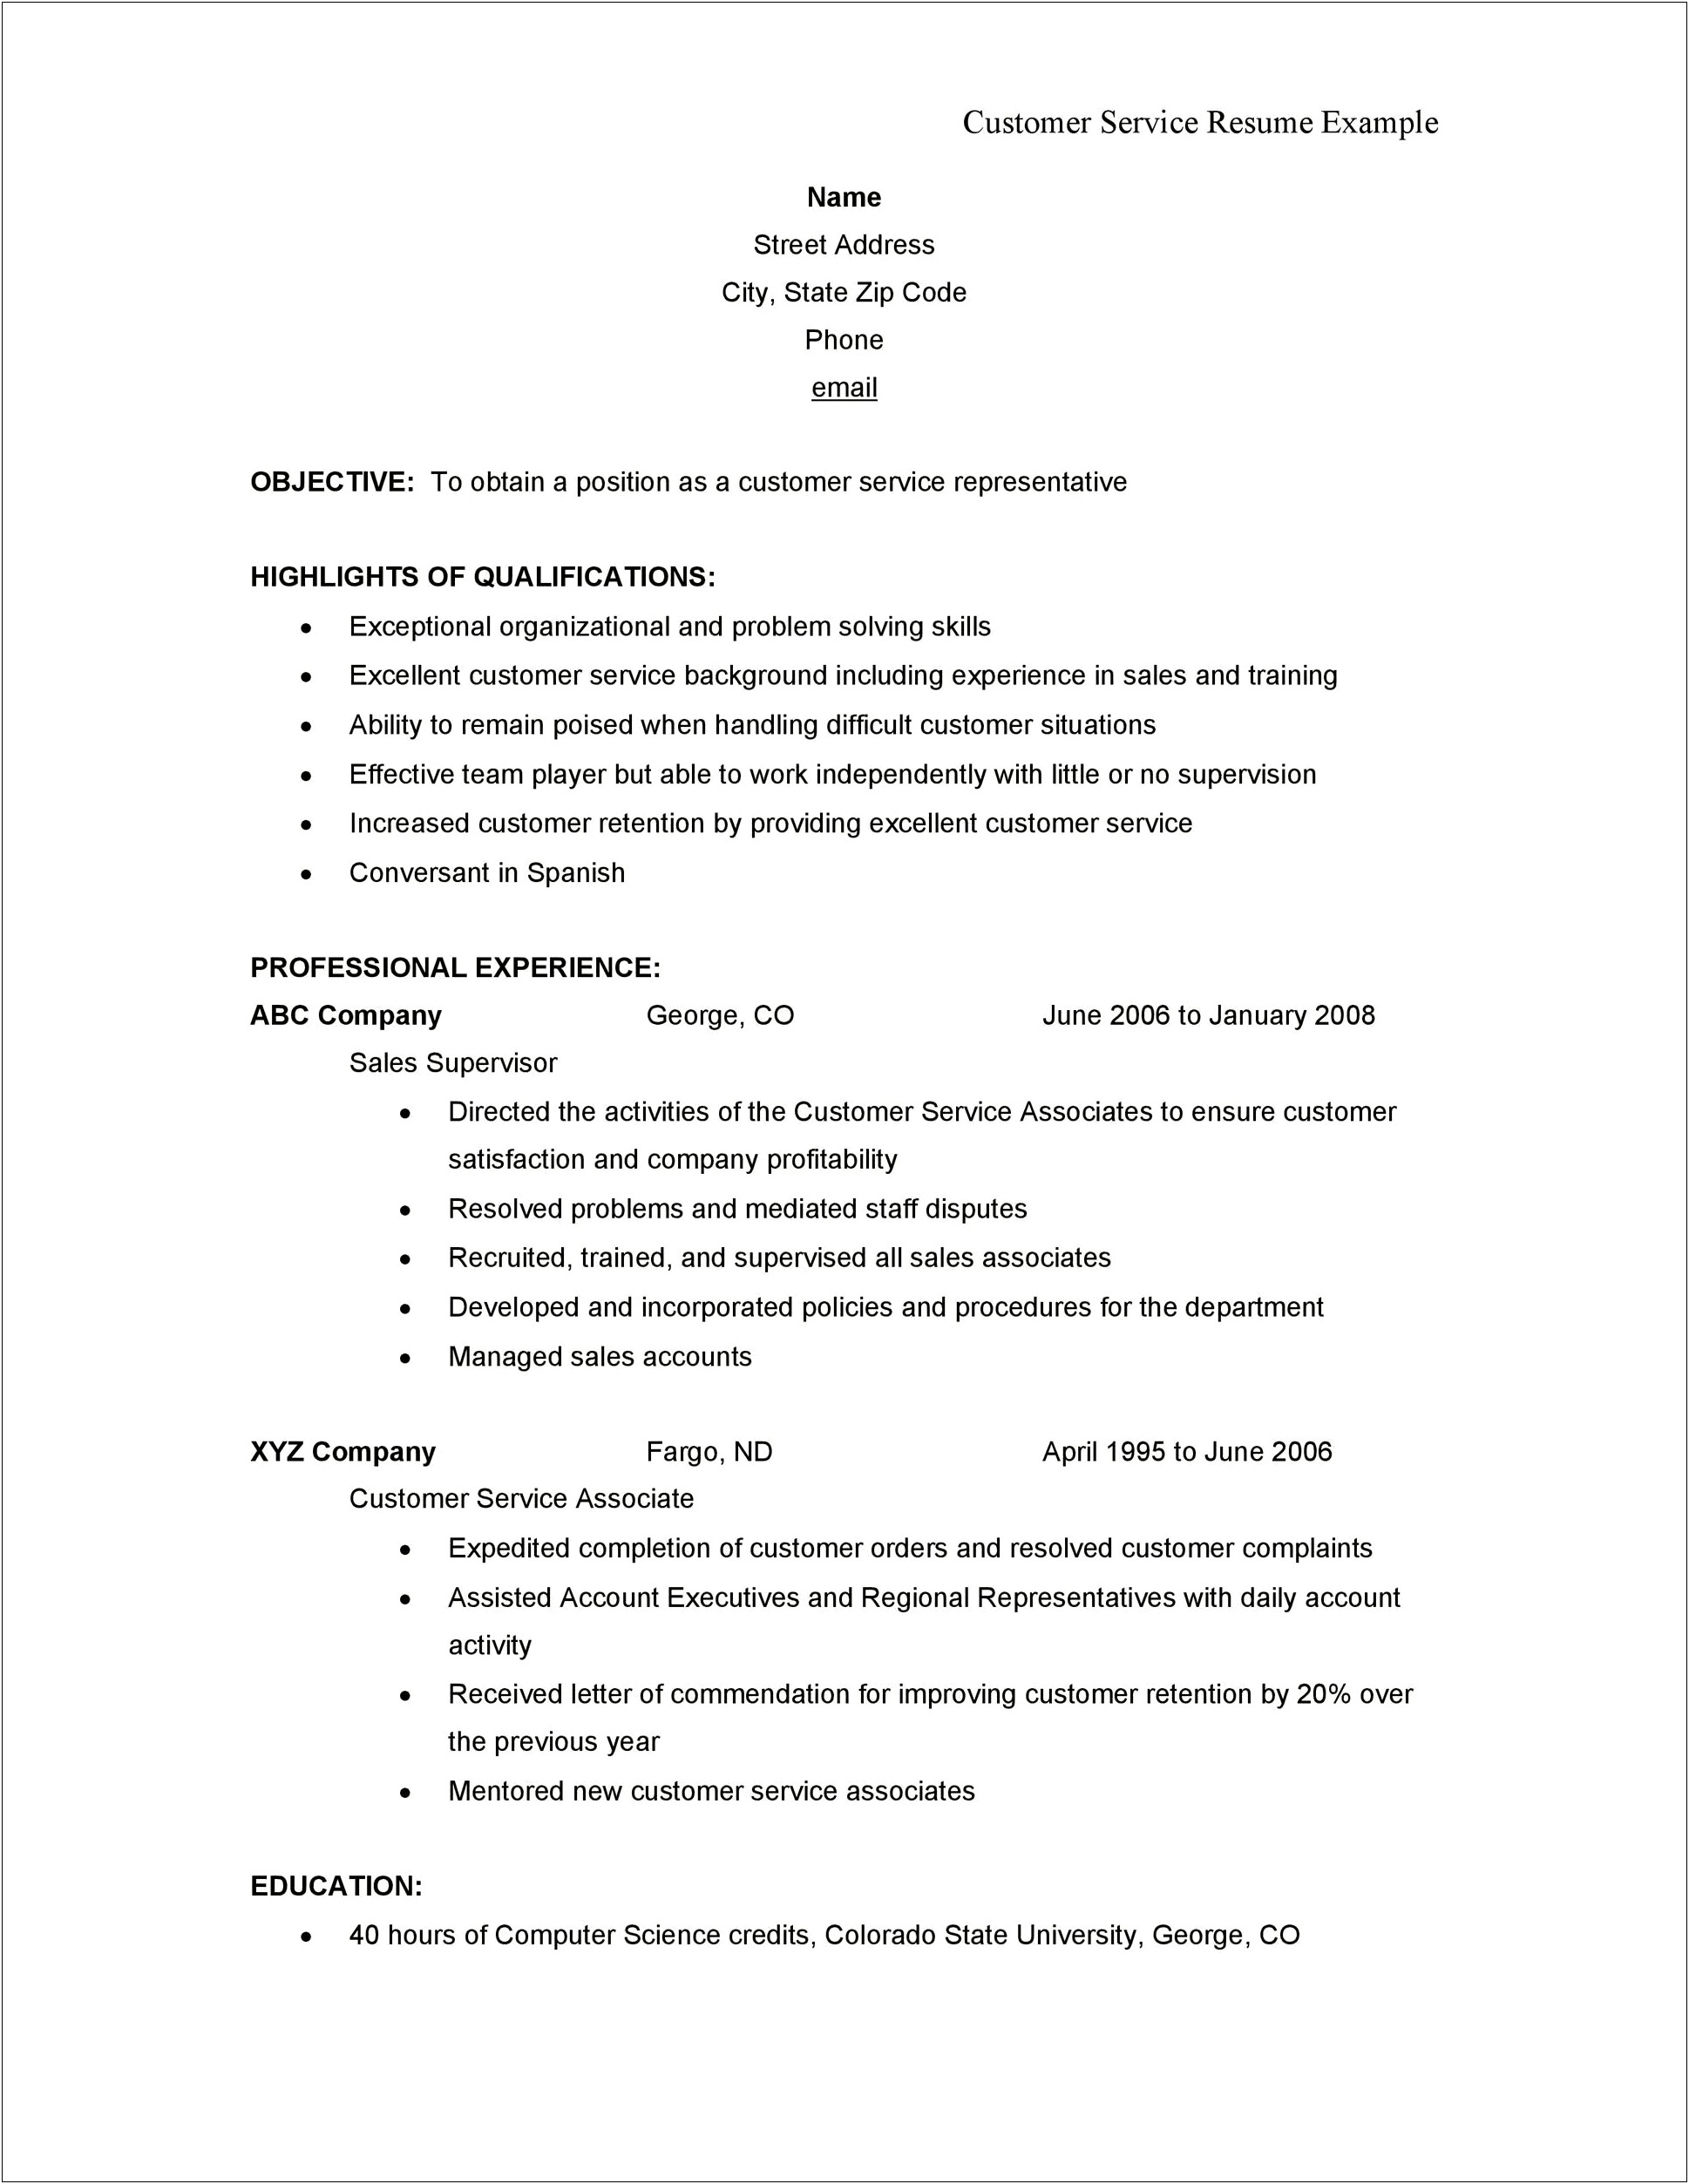 Resume For Customer Service Representative With No Experience